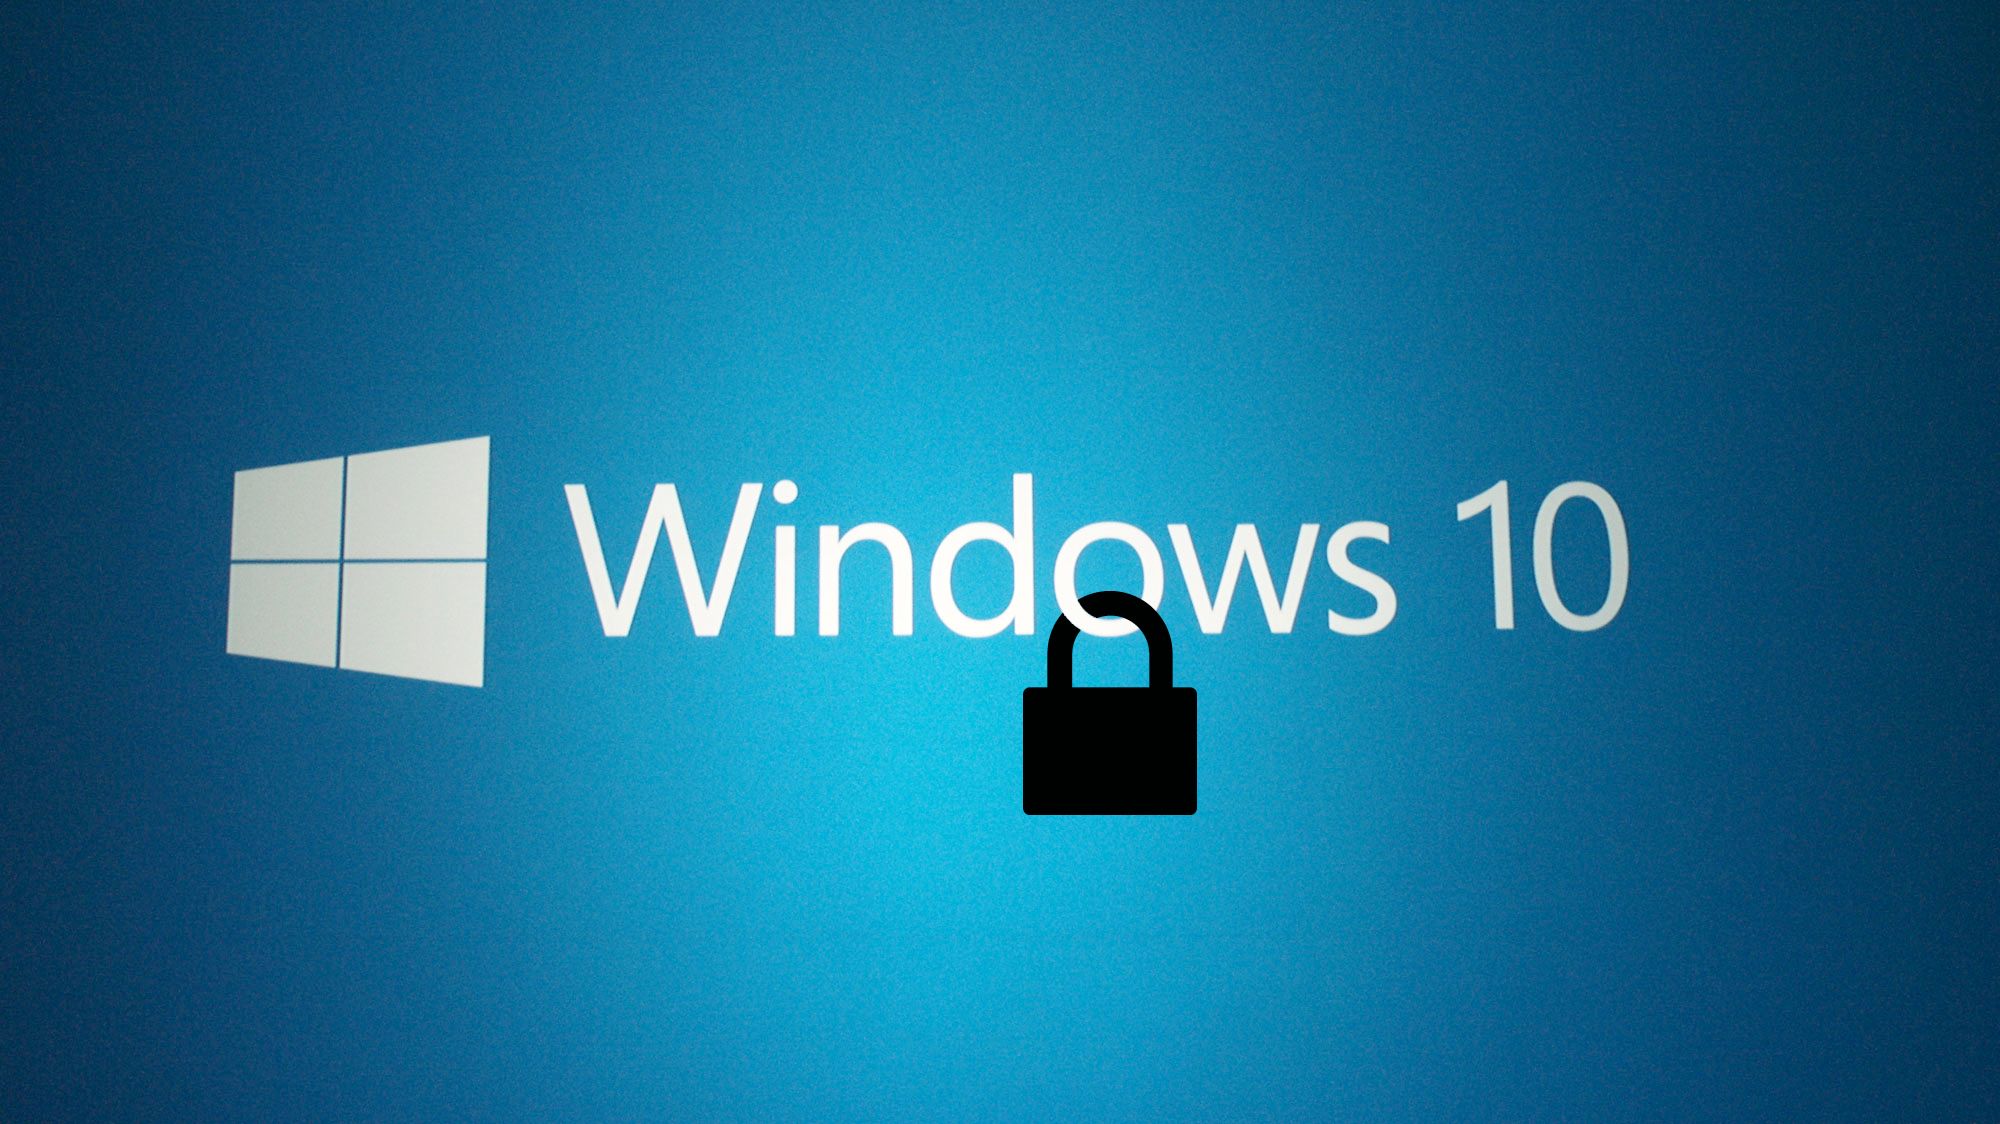 The "30" things you need to configure to Your Windows 10 for ATMs - Part I